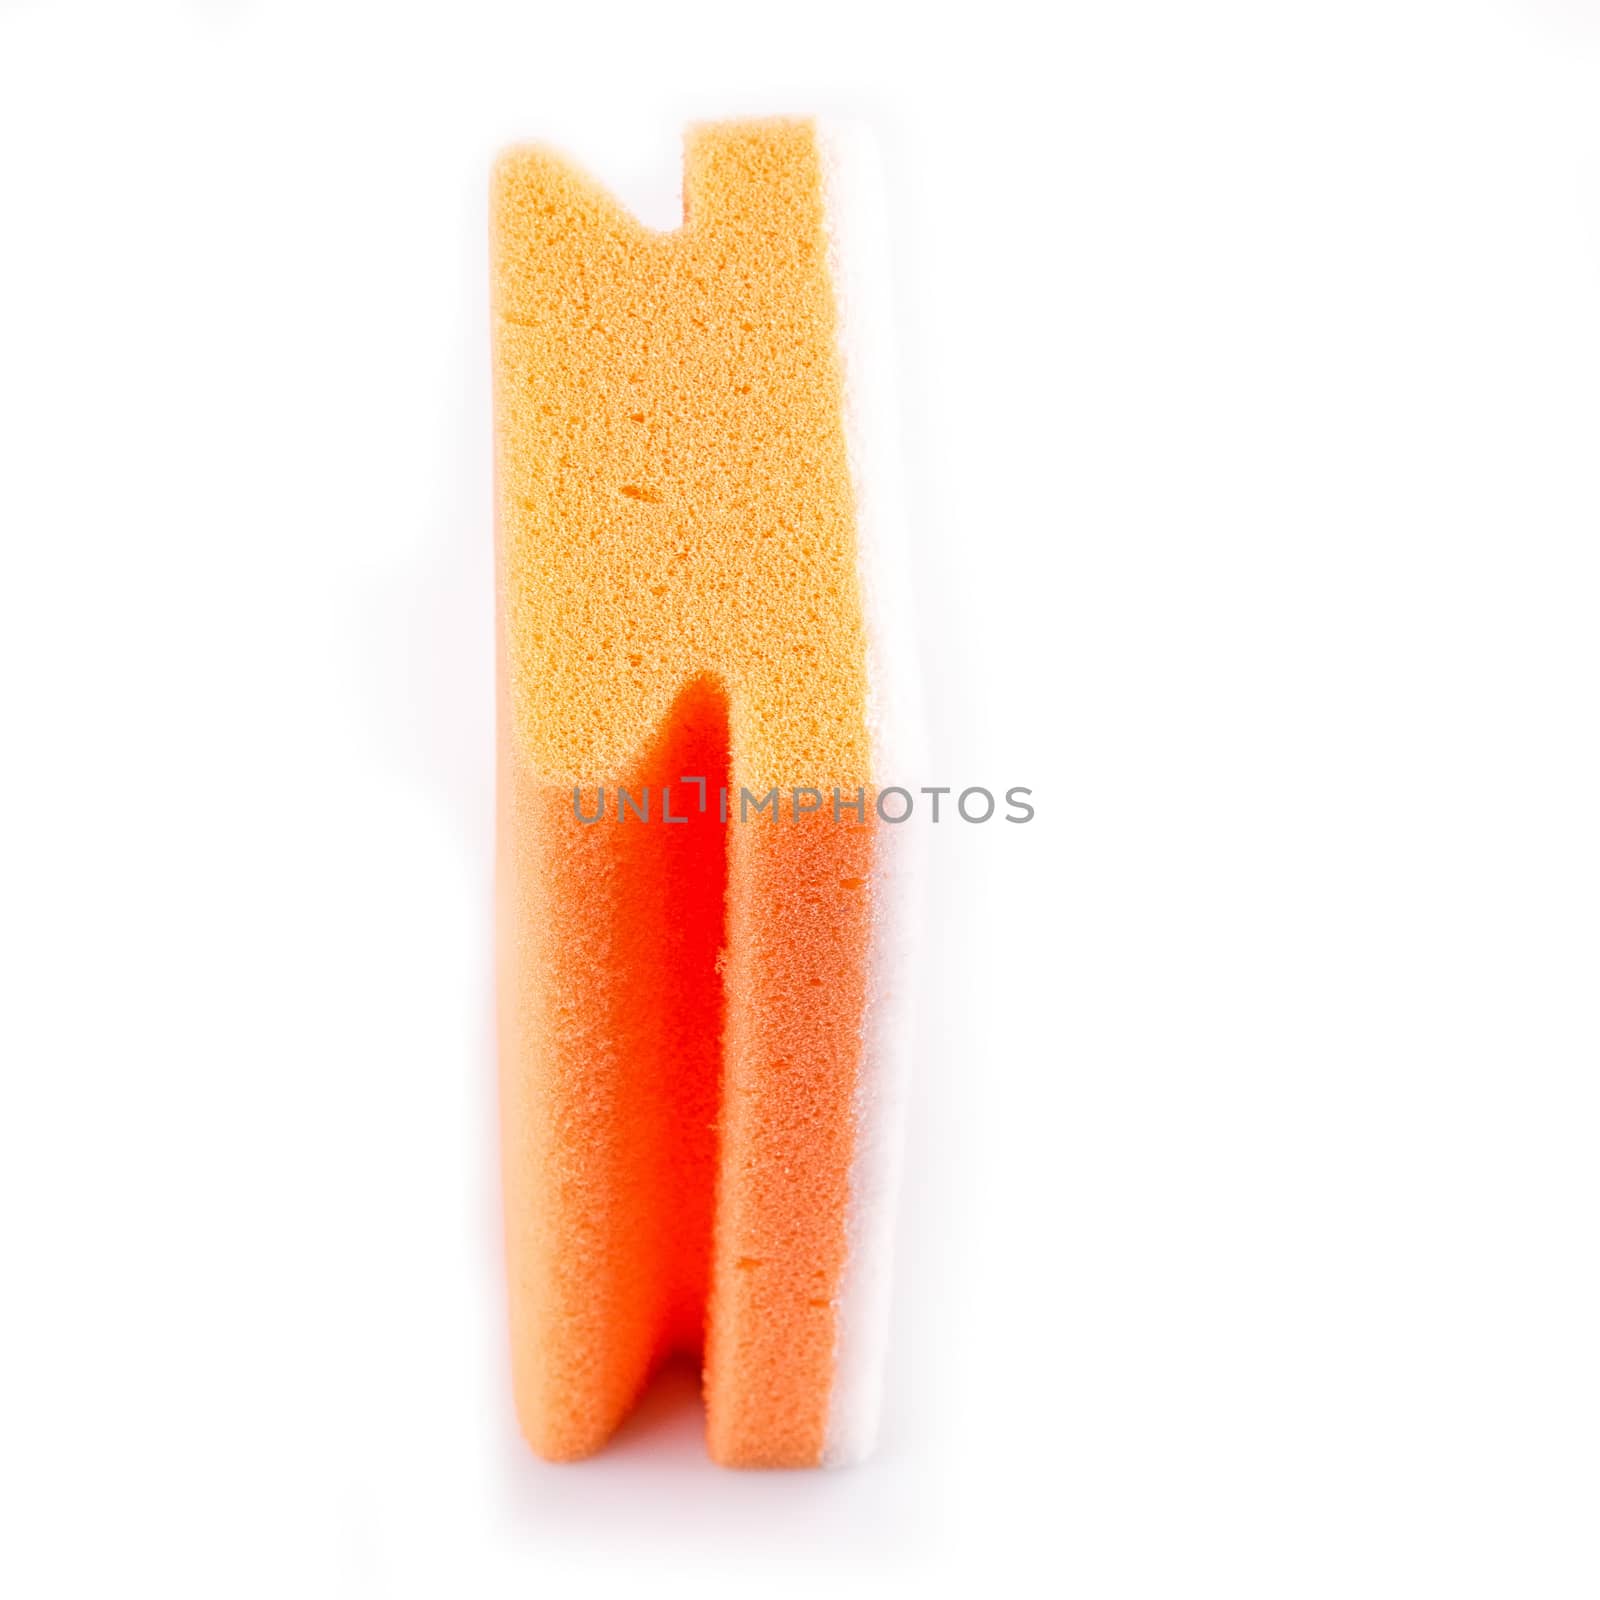 colored sponges close up by victosha